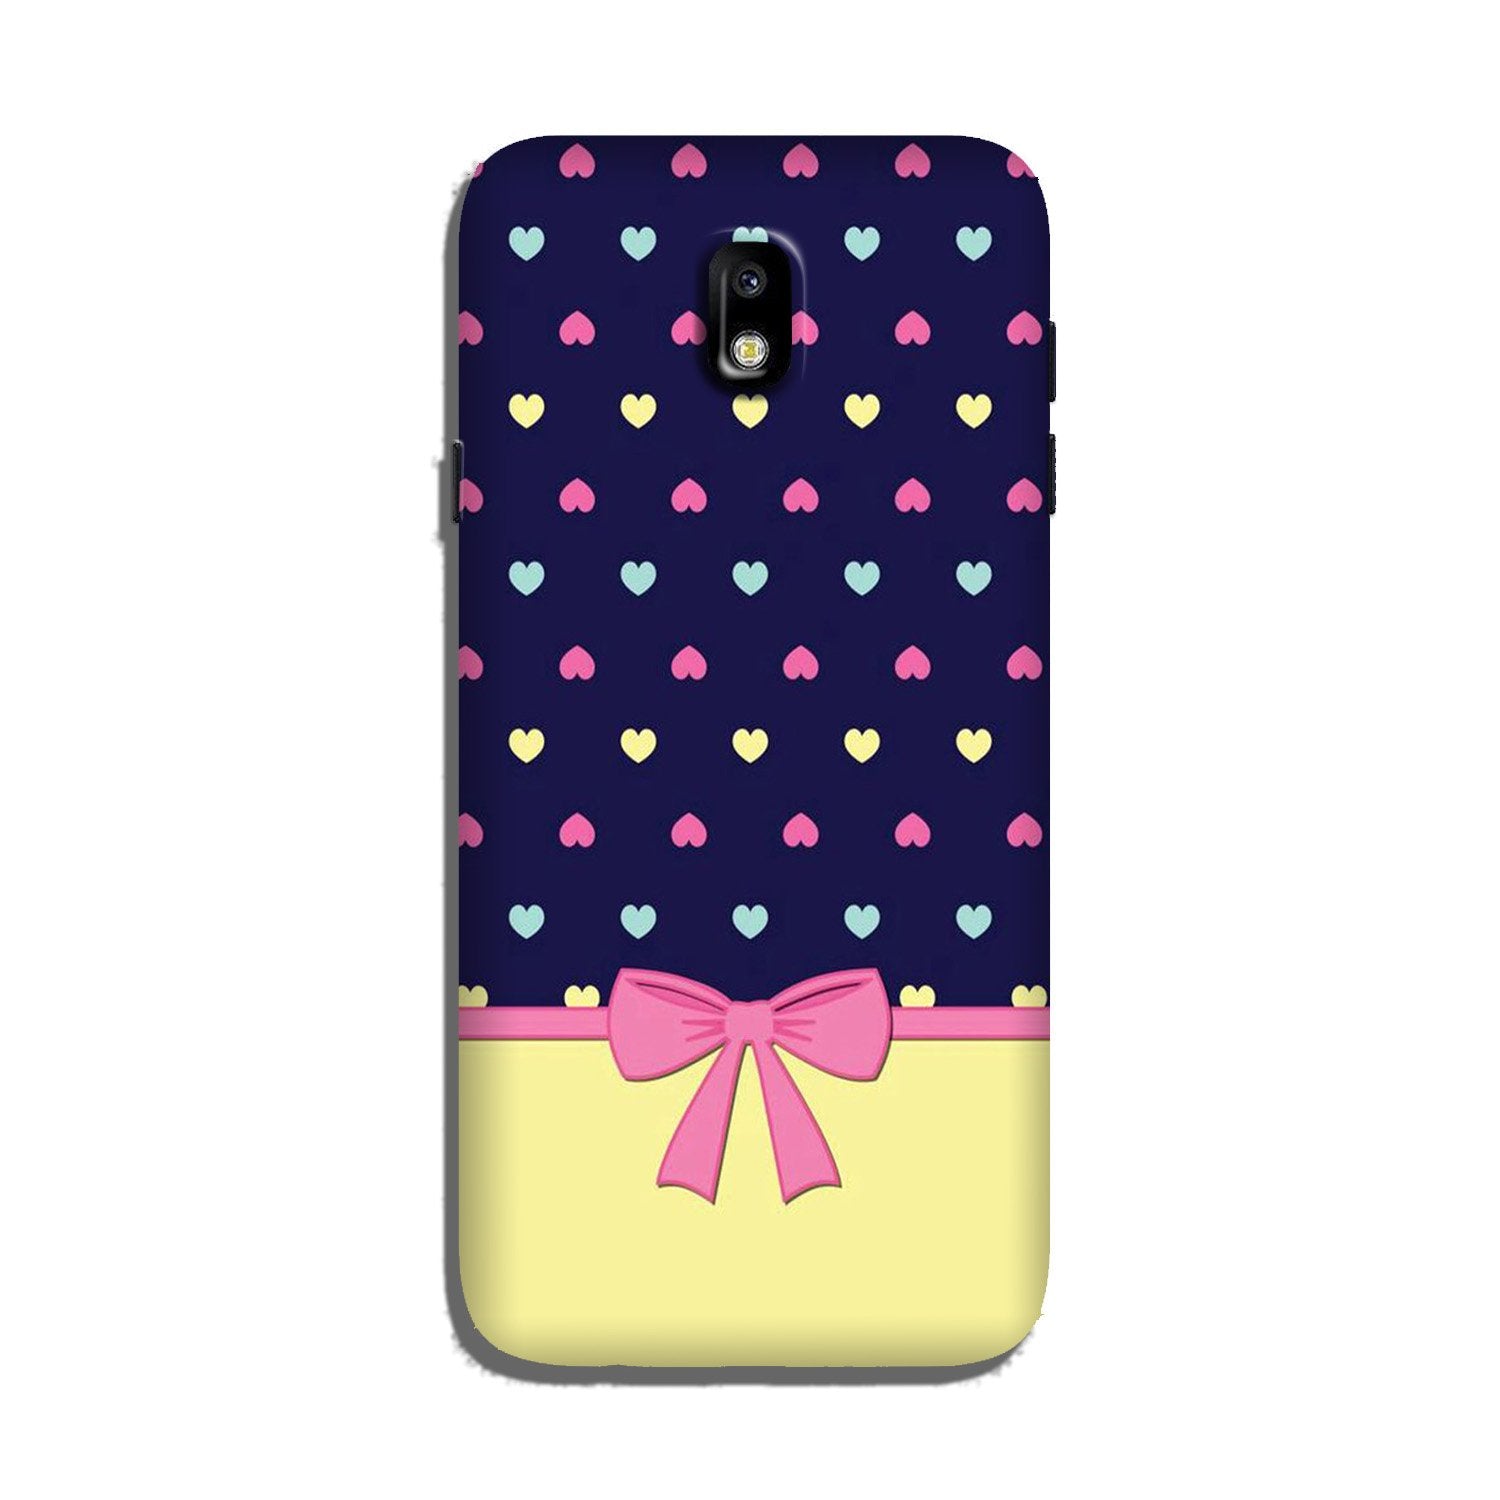 Gift Wrap5 Case for Galaxy J3 Pro